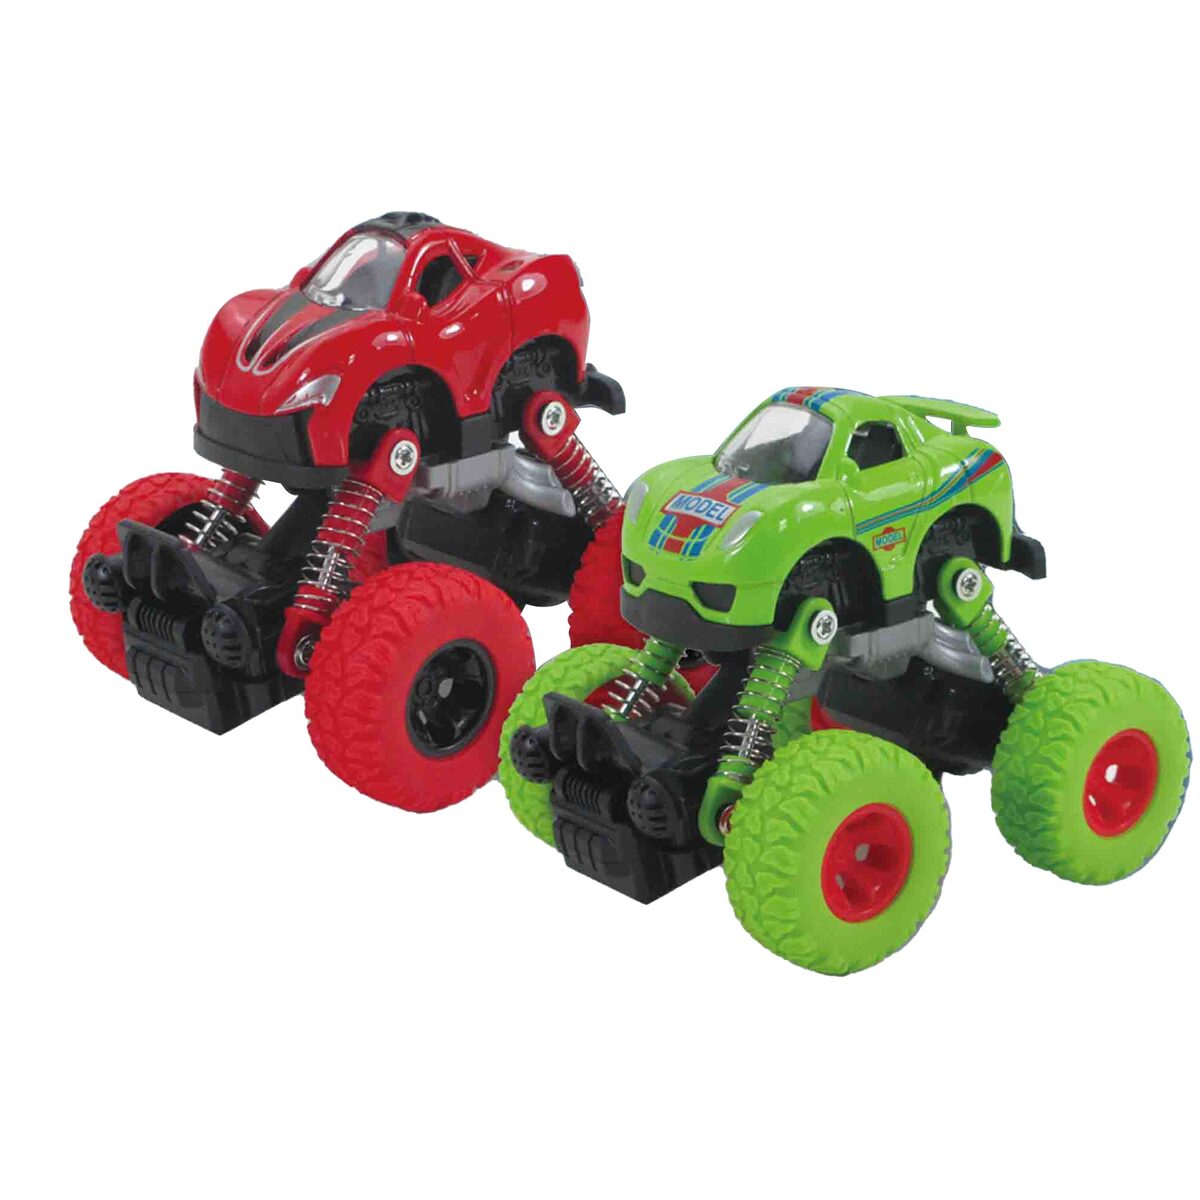 Pull Back Die Cast Car Assorted Color